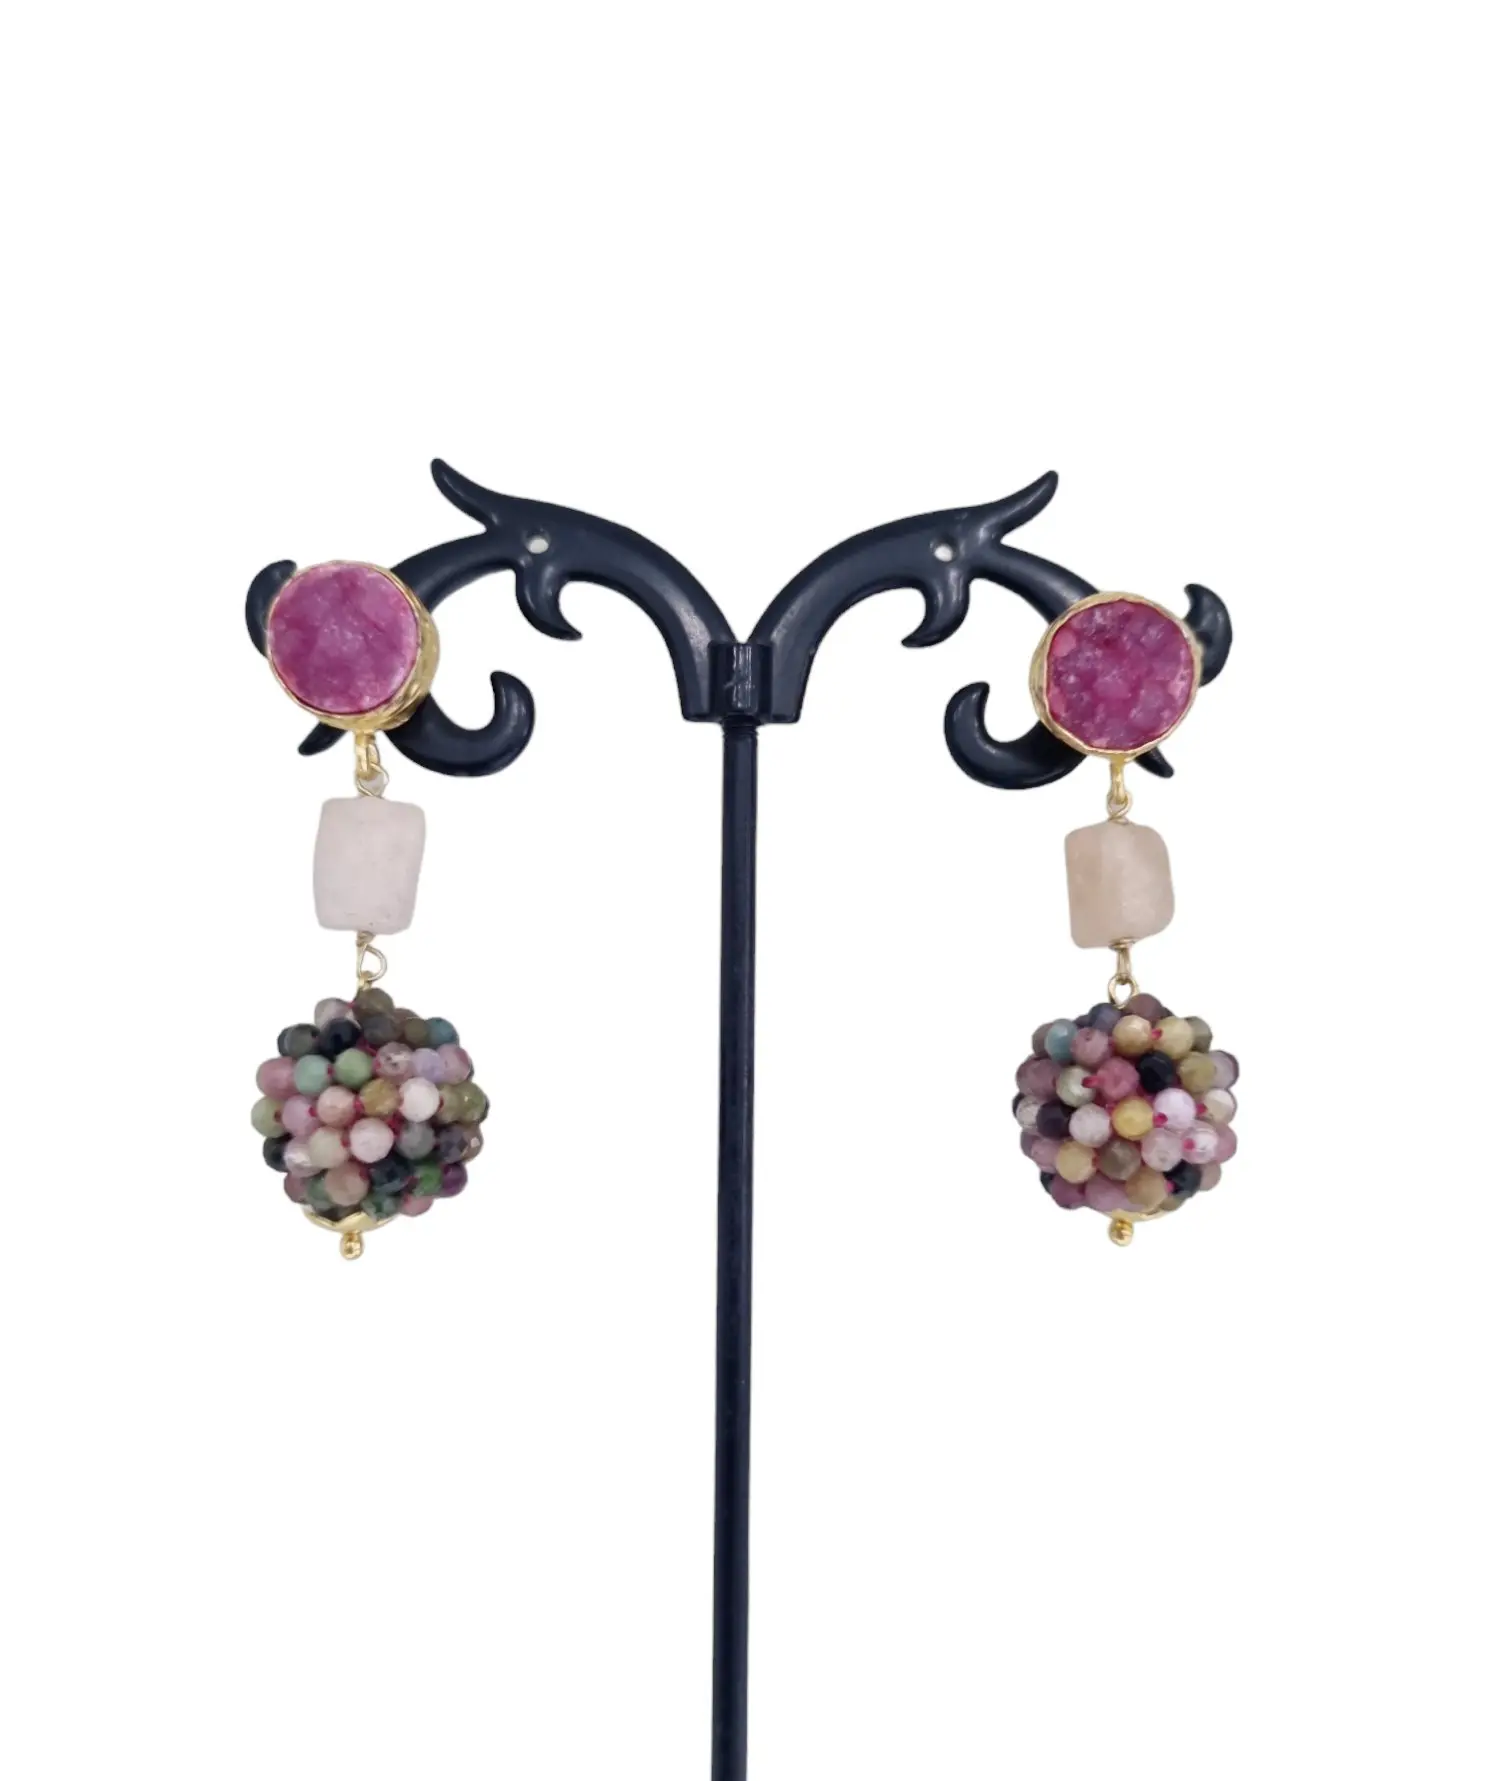 Earrings with druzy rose quartz and tourmaline – Weight 5.7g, length 4.5cm.